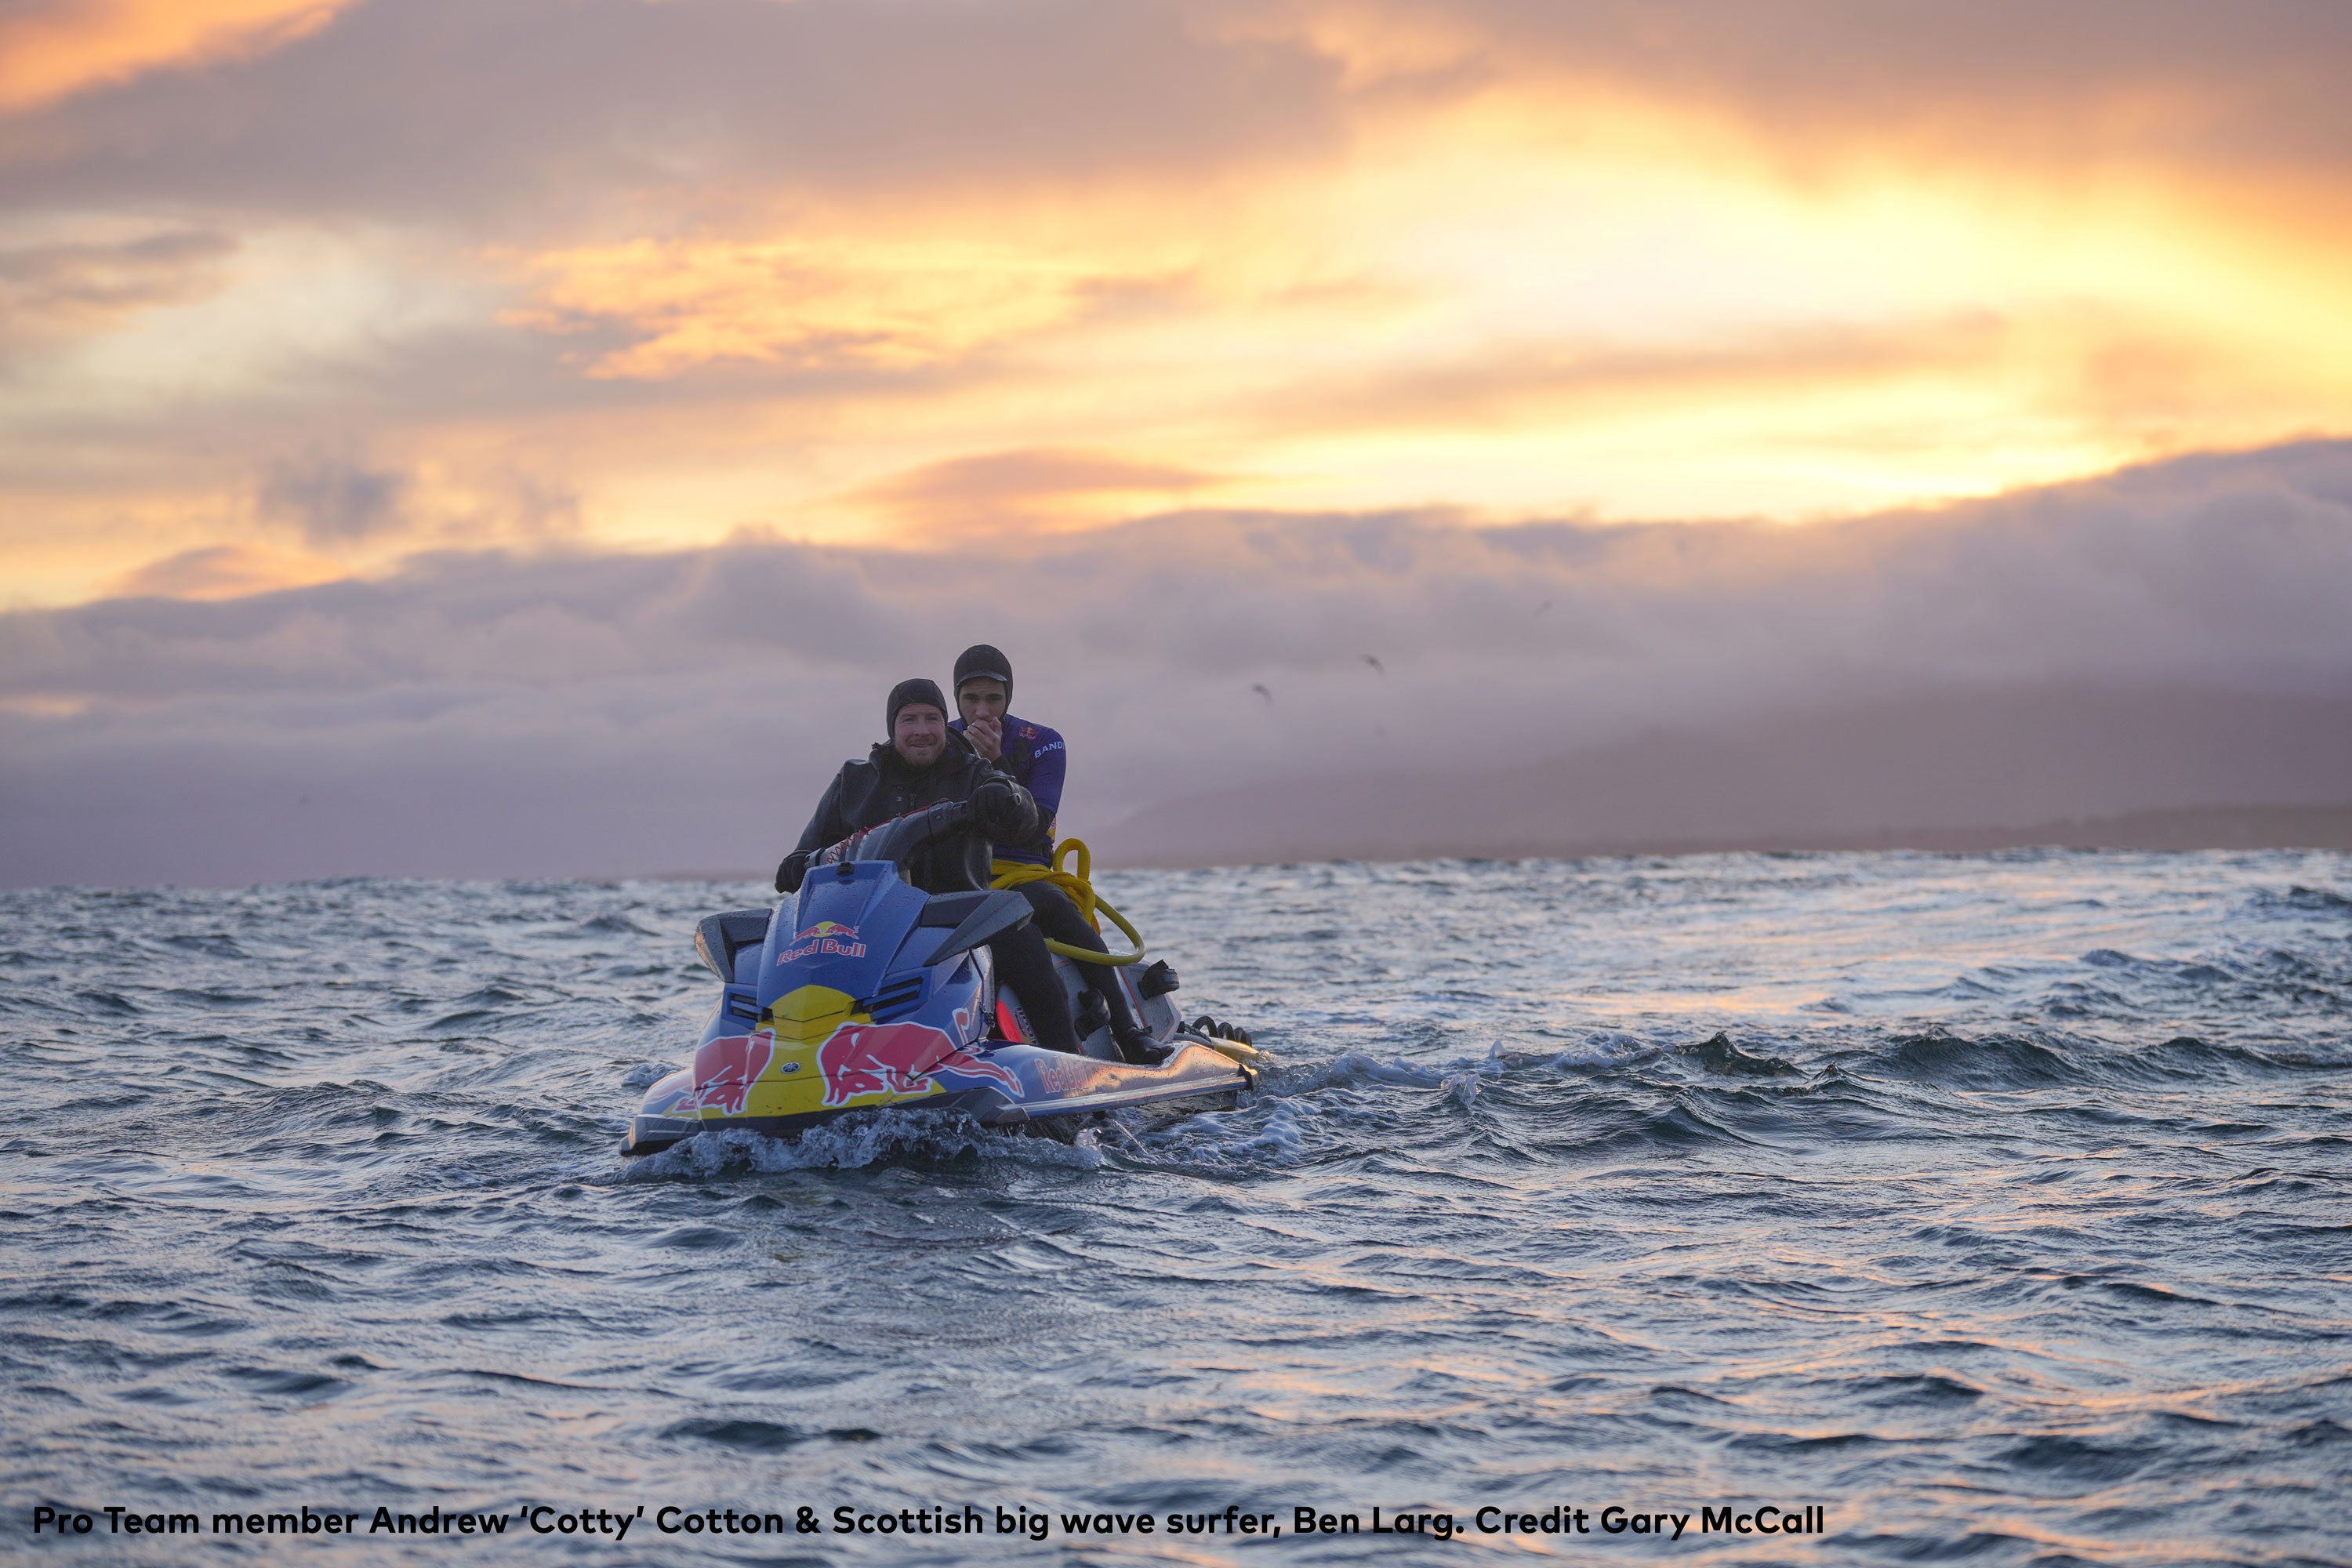 Pro Team member Andrew ‘Cotty’ Cotton & Scottish big wave surfer, Ben Larg on a jet ski close to the coast with the sun setting behind a cloudy sky behind